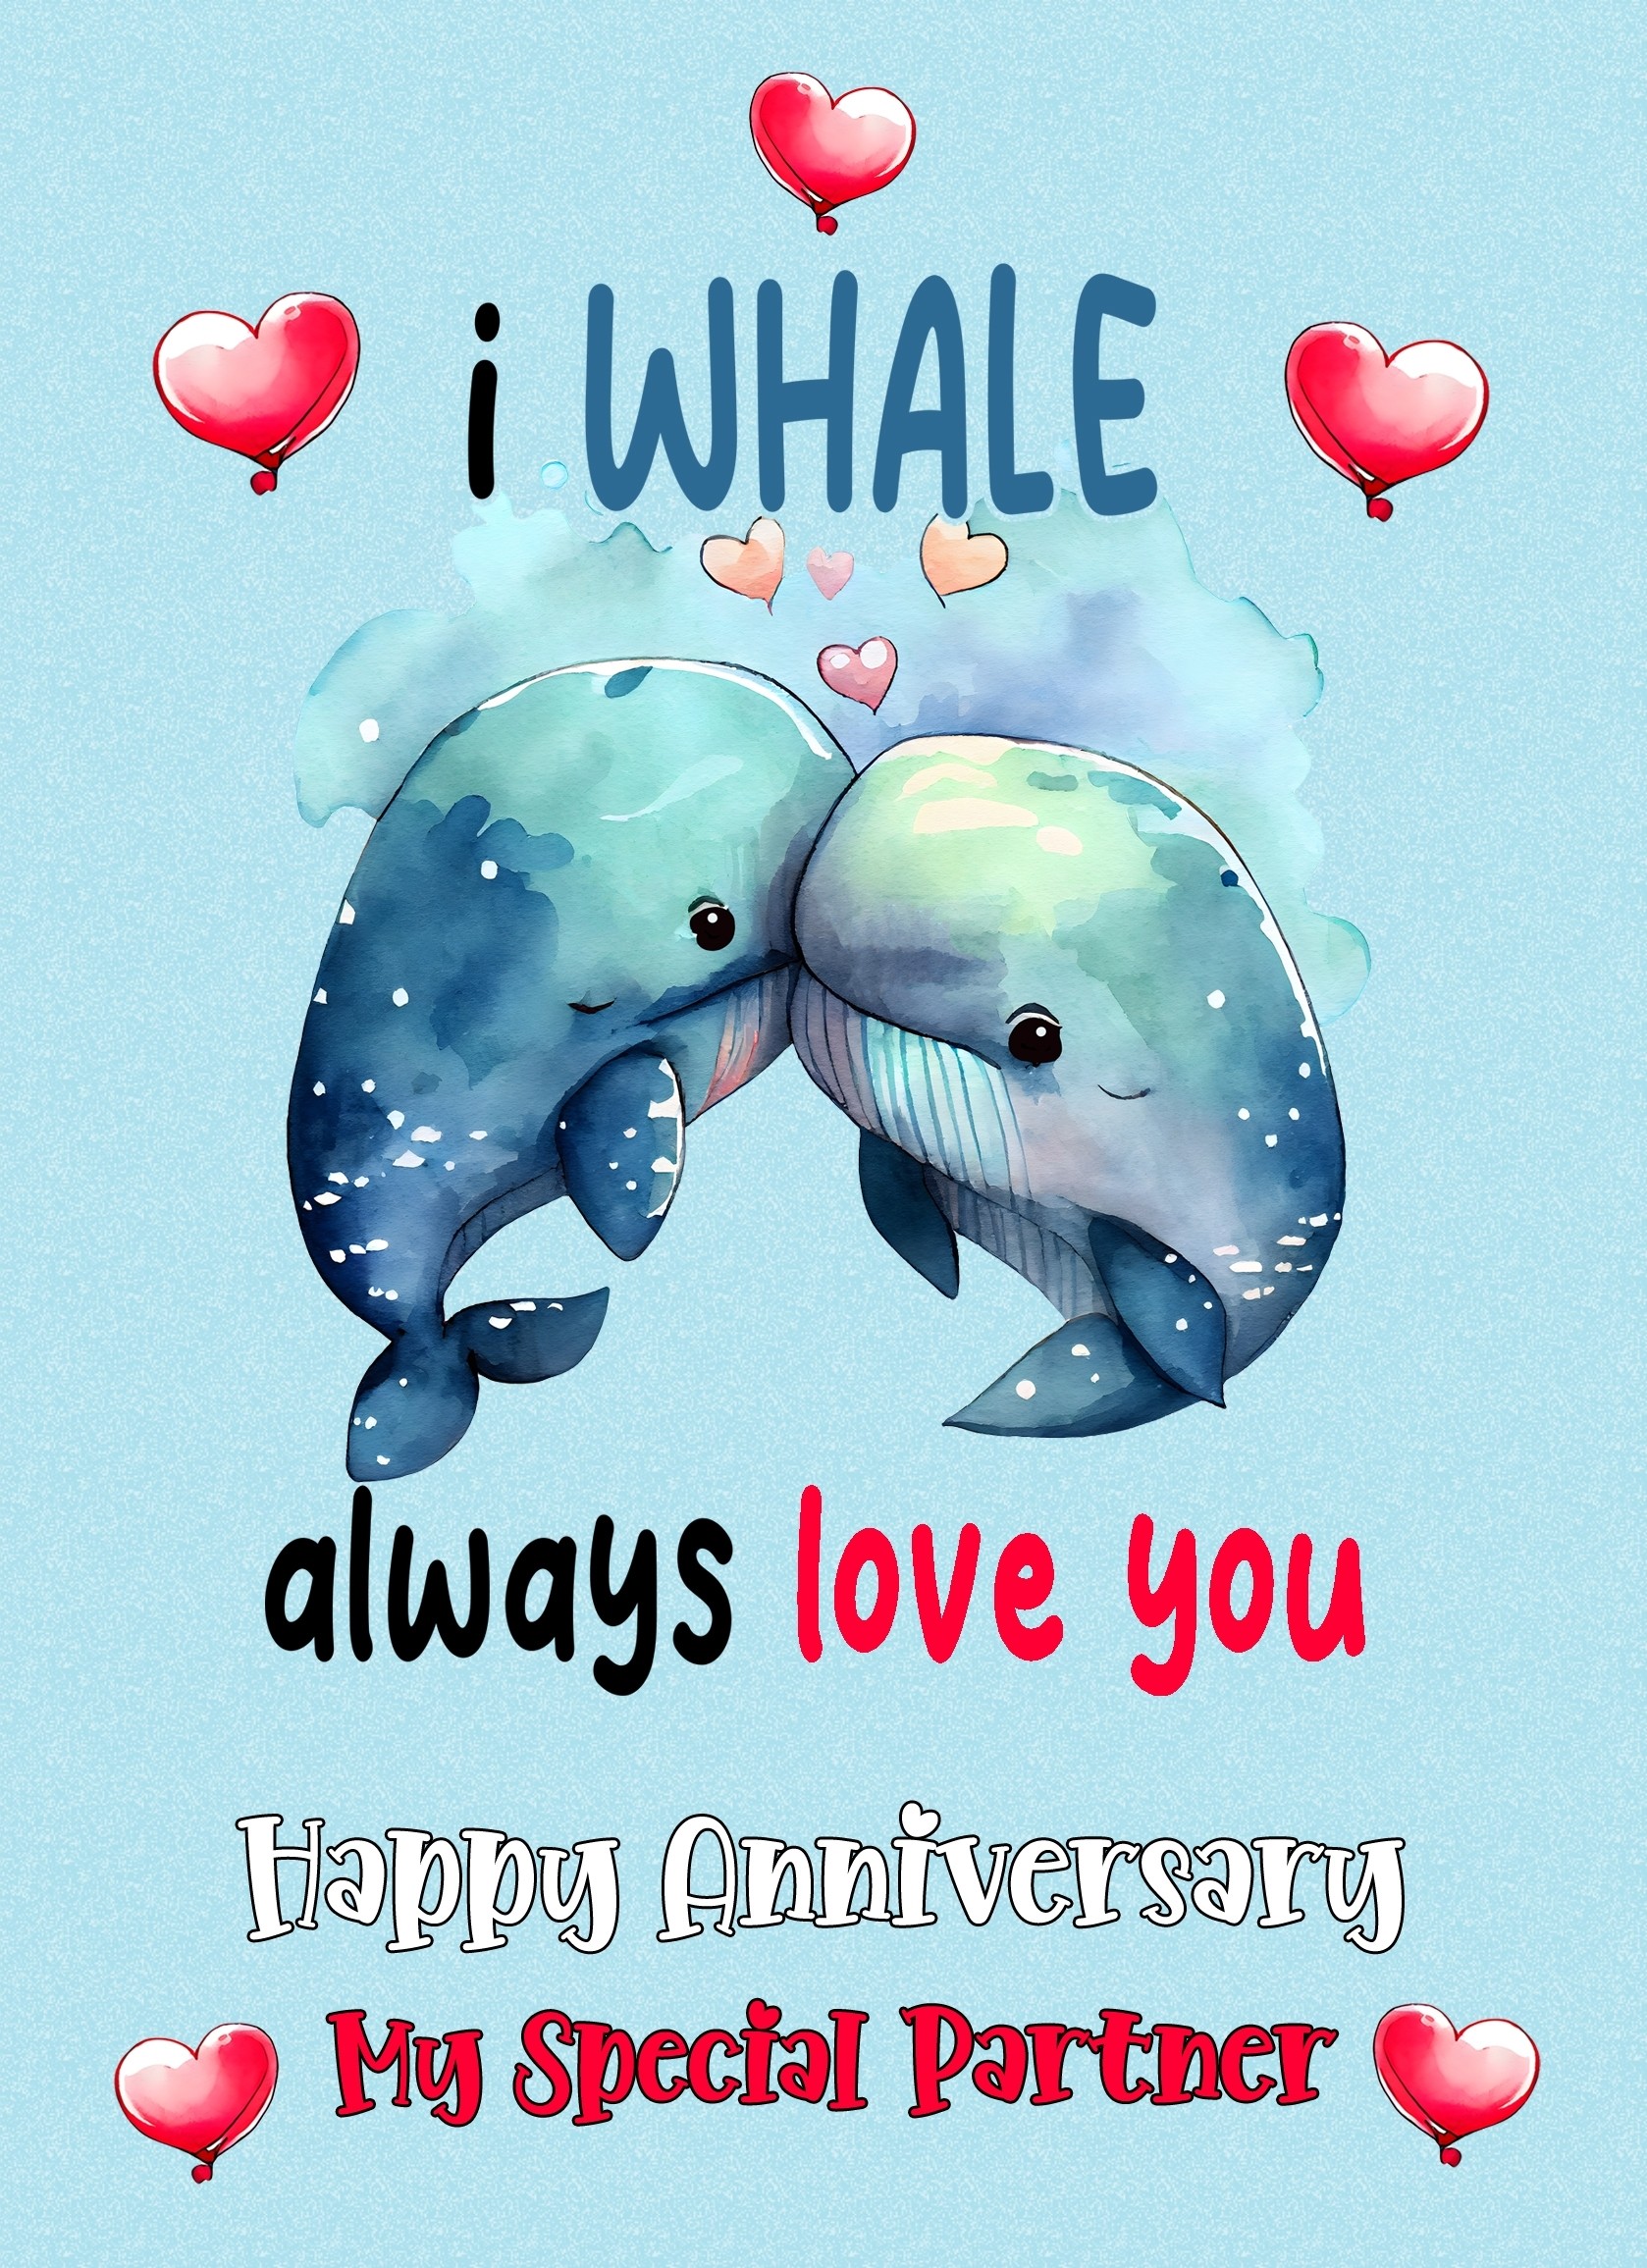 Funny Pun Romantic Anniversary Card for Partner (Whale)